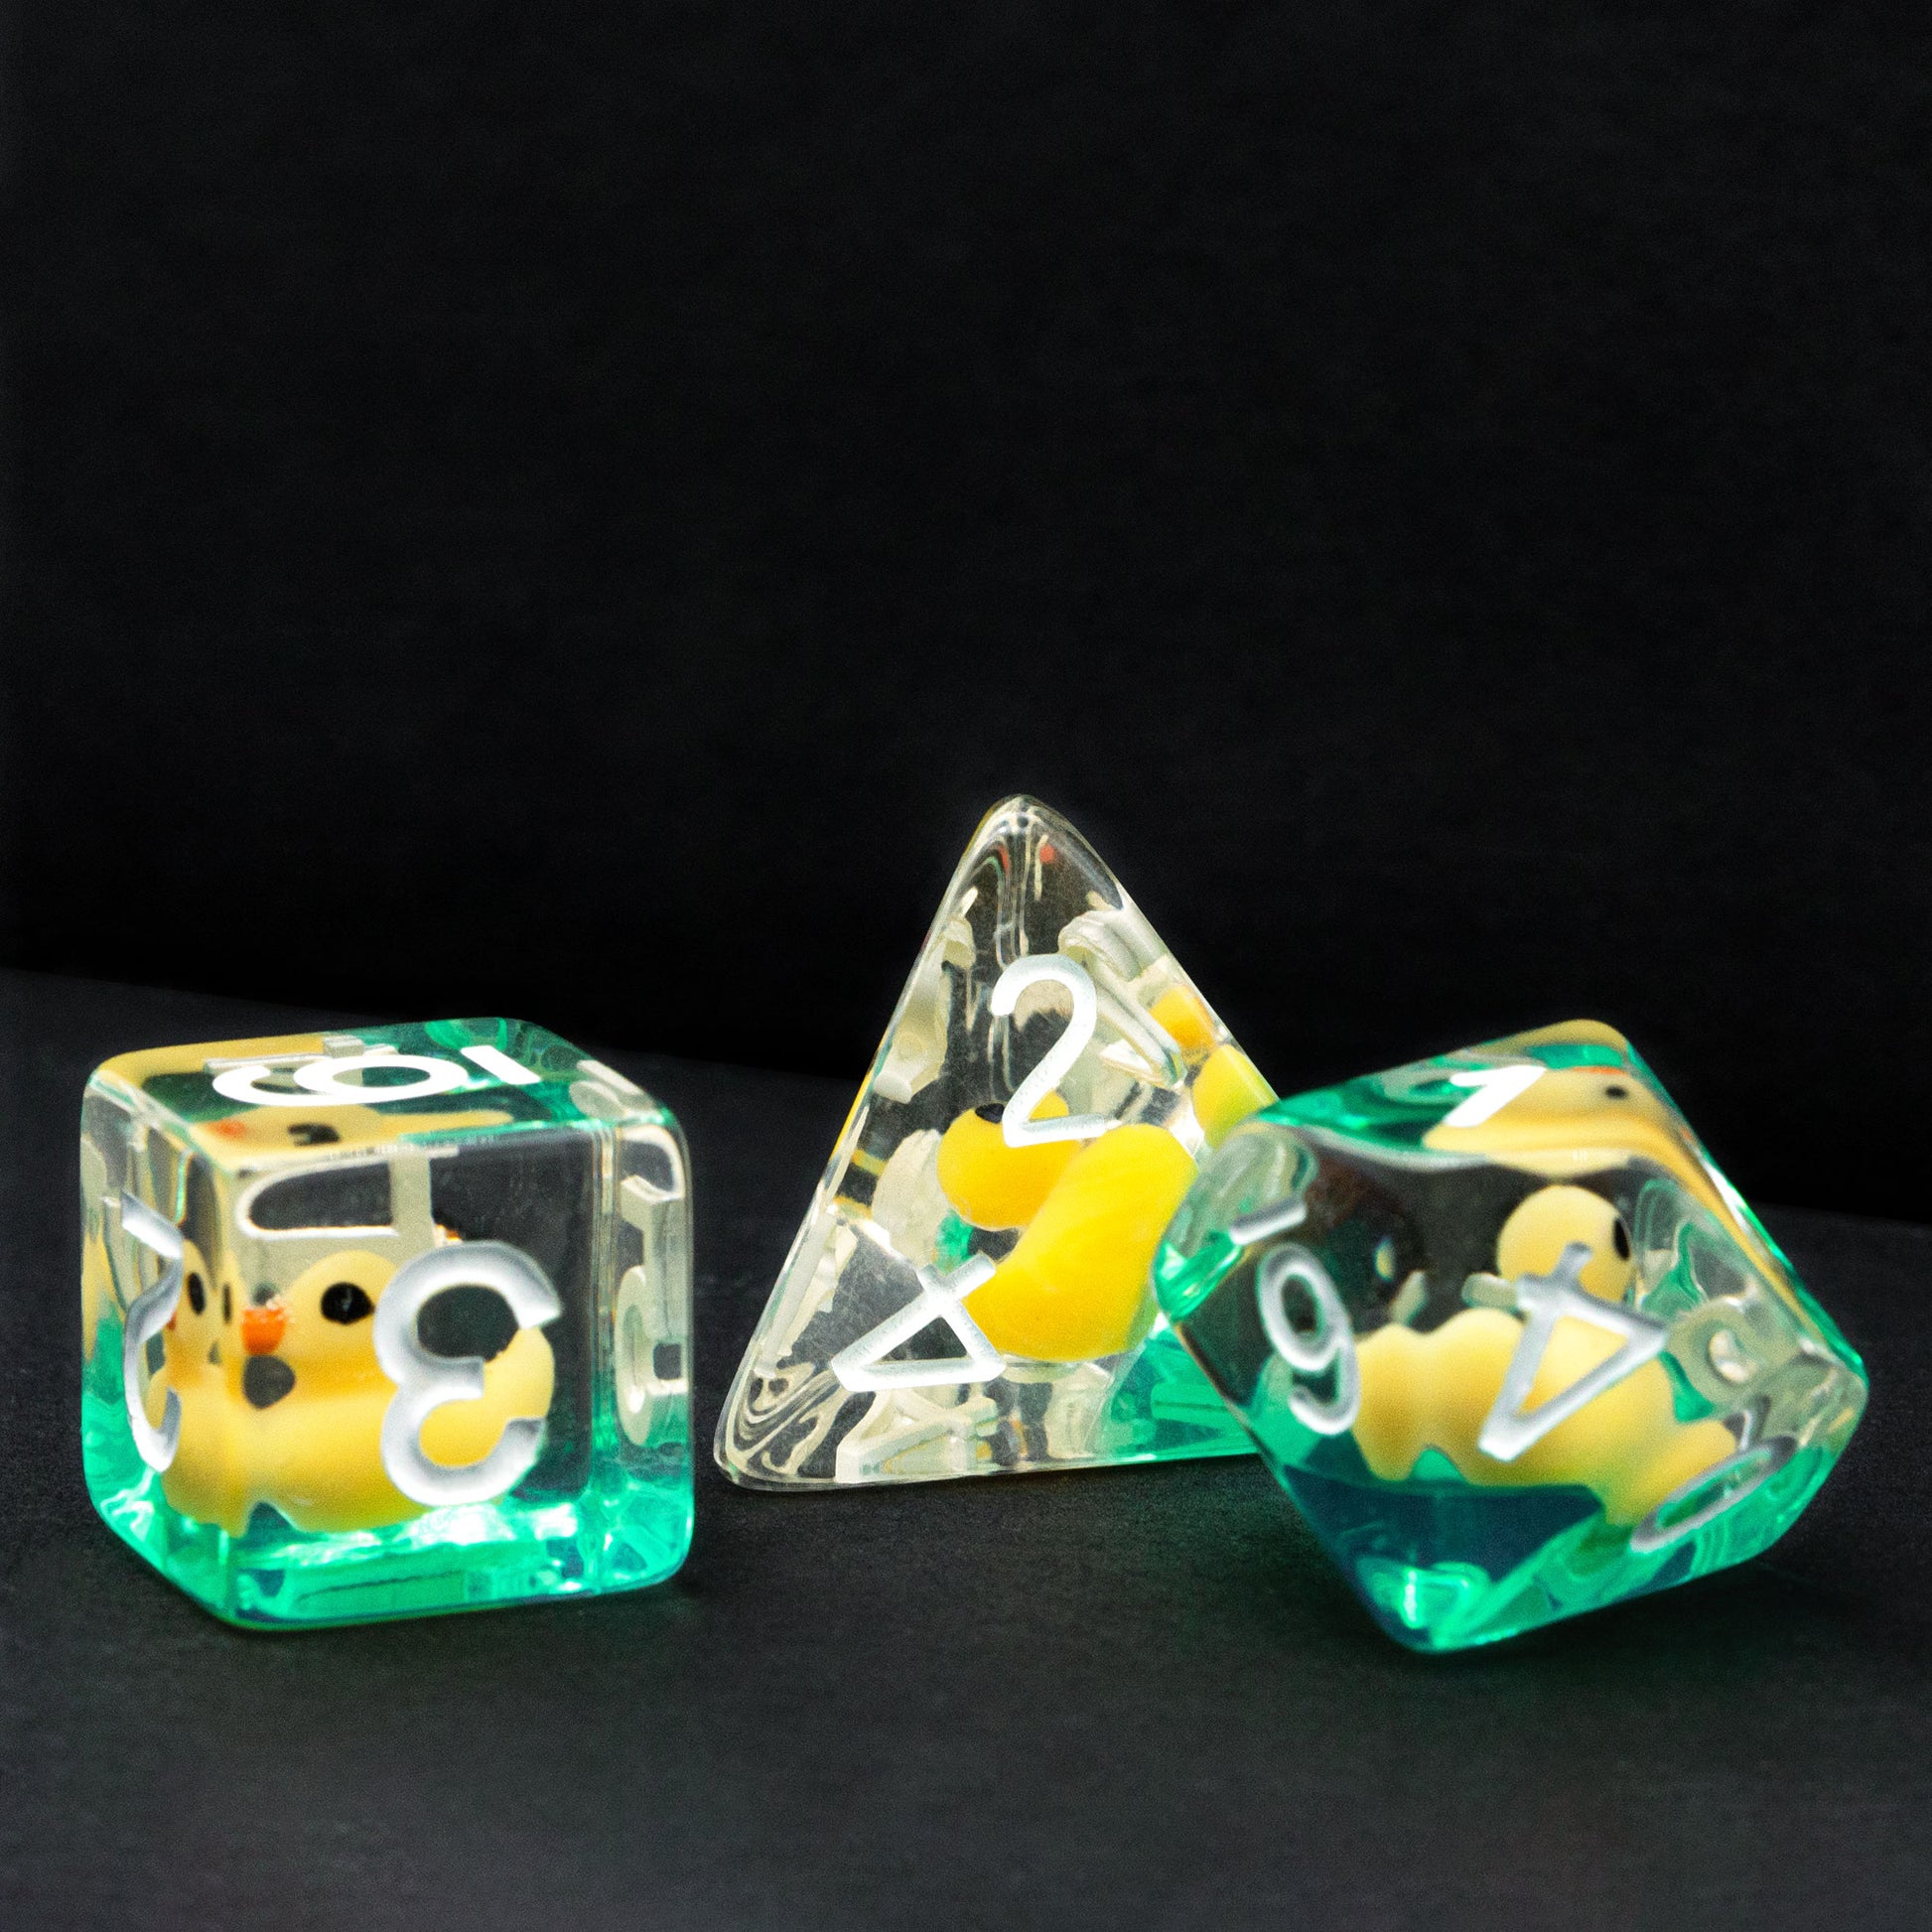 d6, d4 and d10 ducky dice with black background